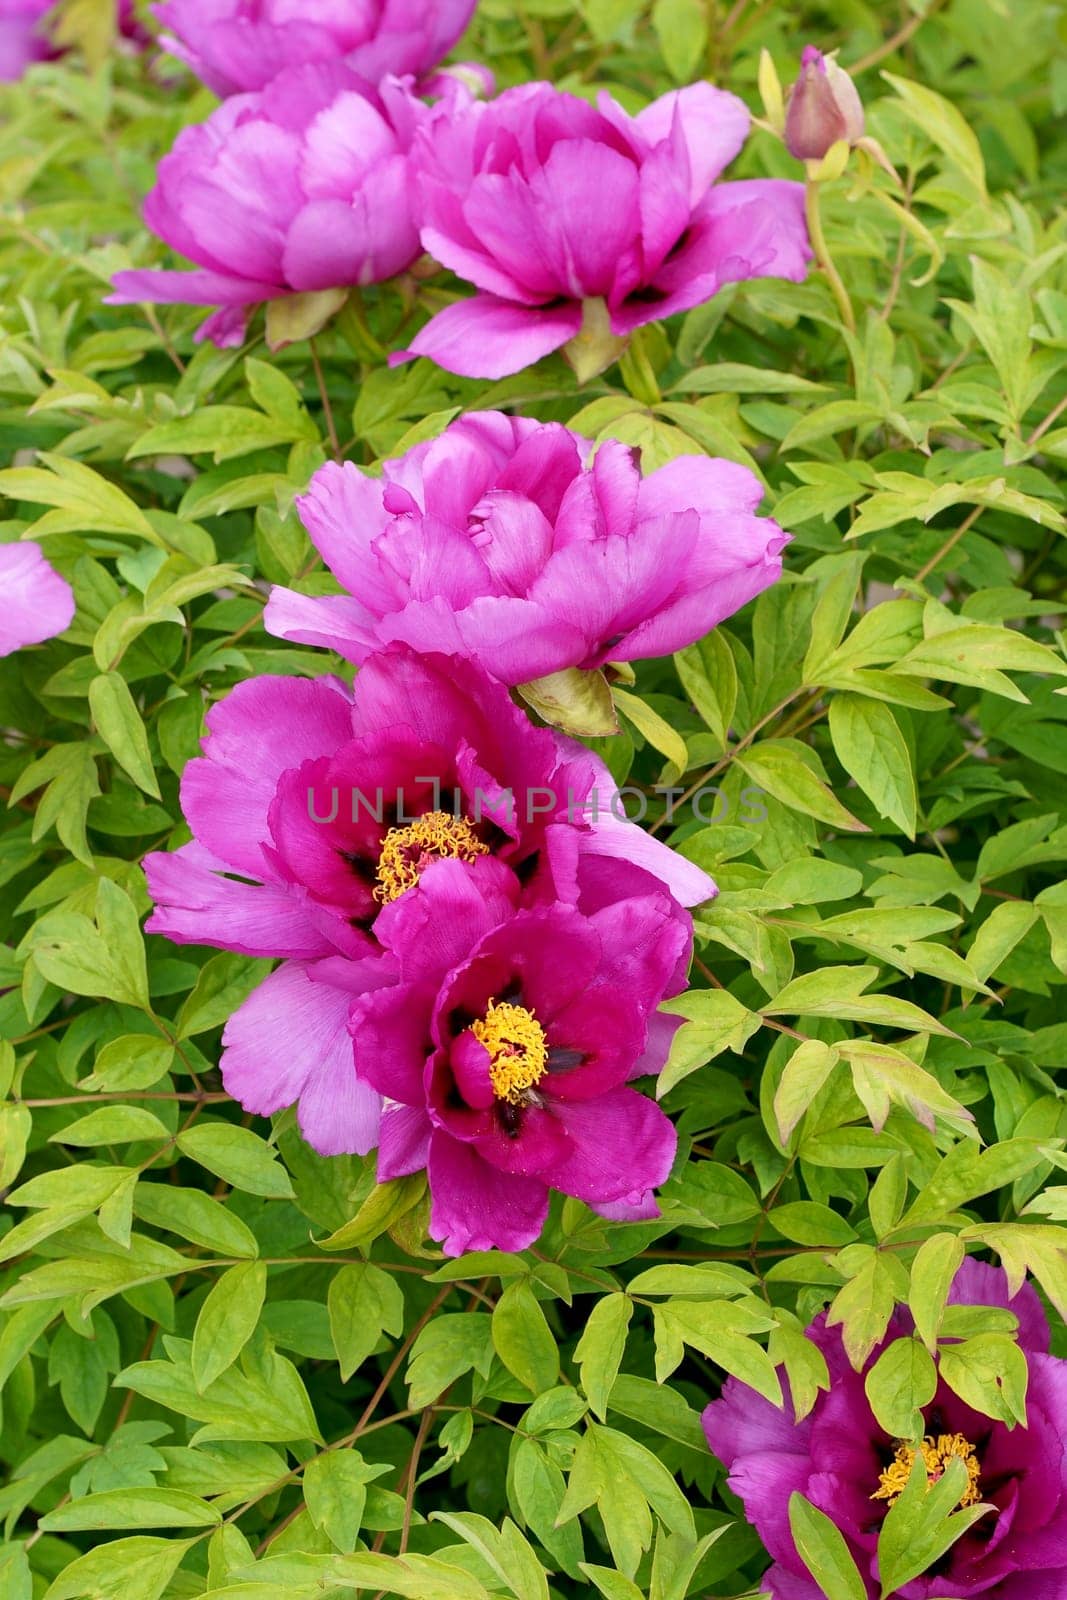 Burgundy large tree peony. Pink Flower of Tree Peony Blooming in the garden. Beautiful Petals of Paeonia sect. by aprilphoto